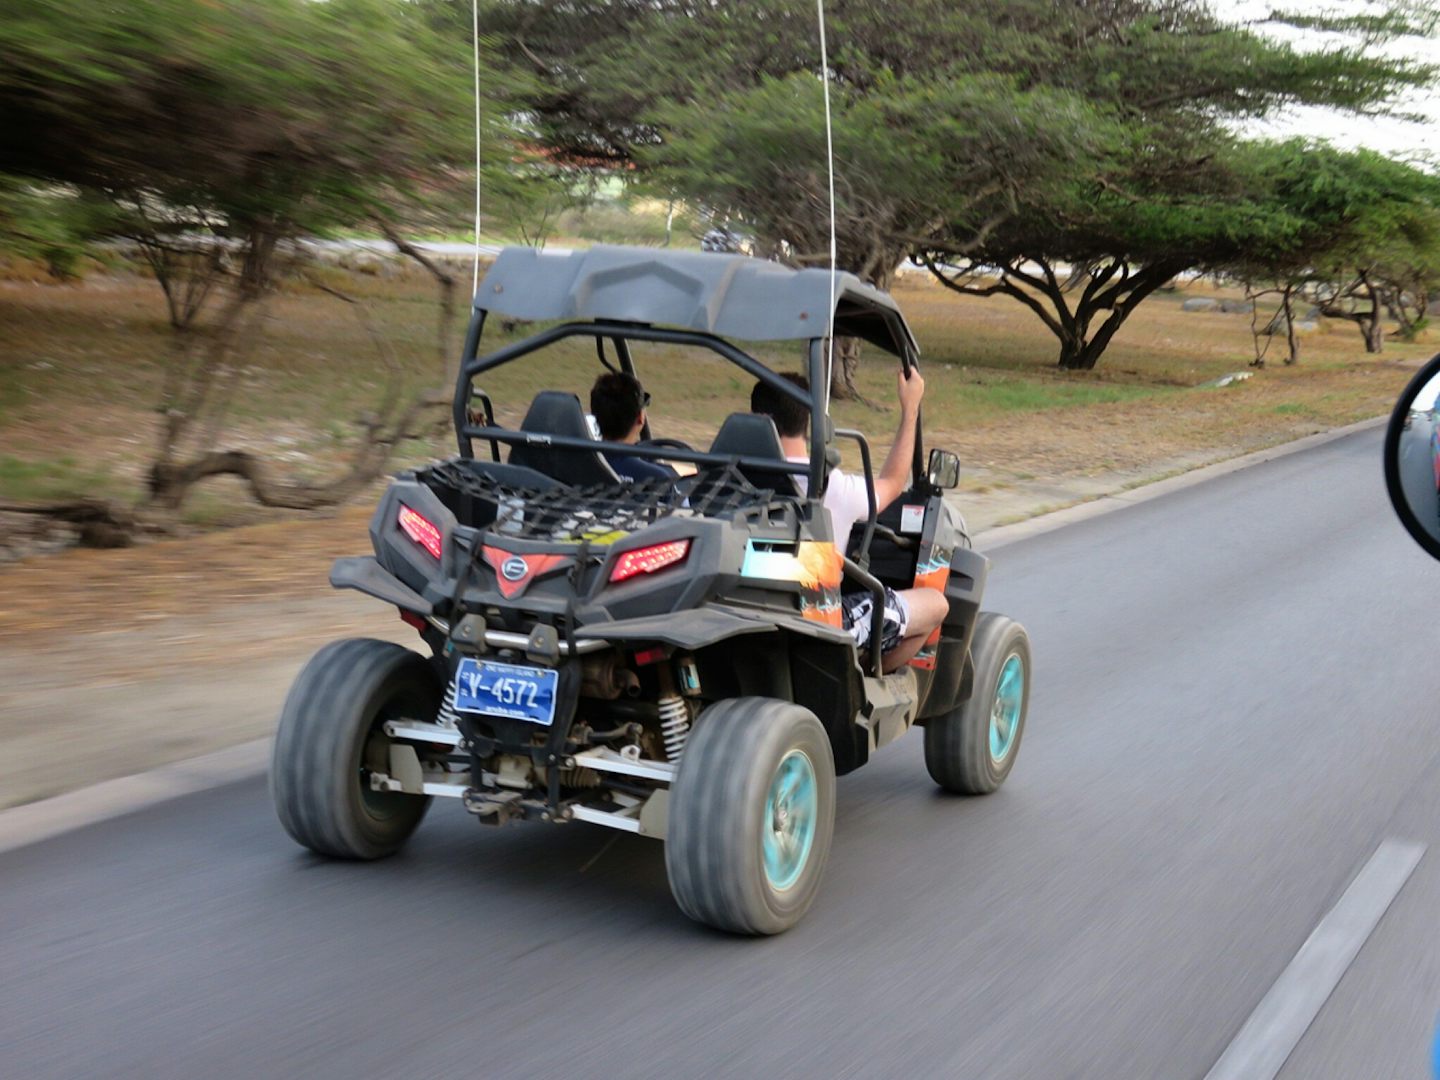 This is the best way to get around in Aruba.